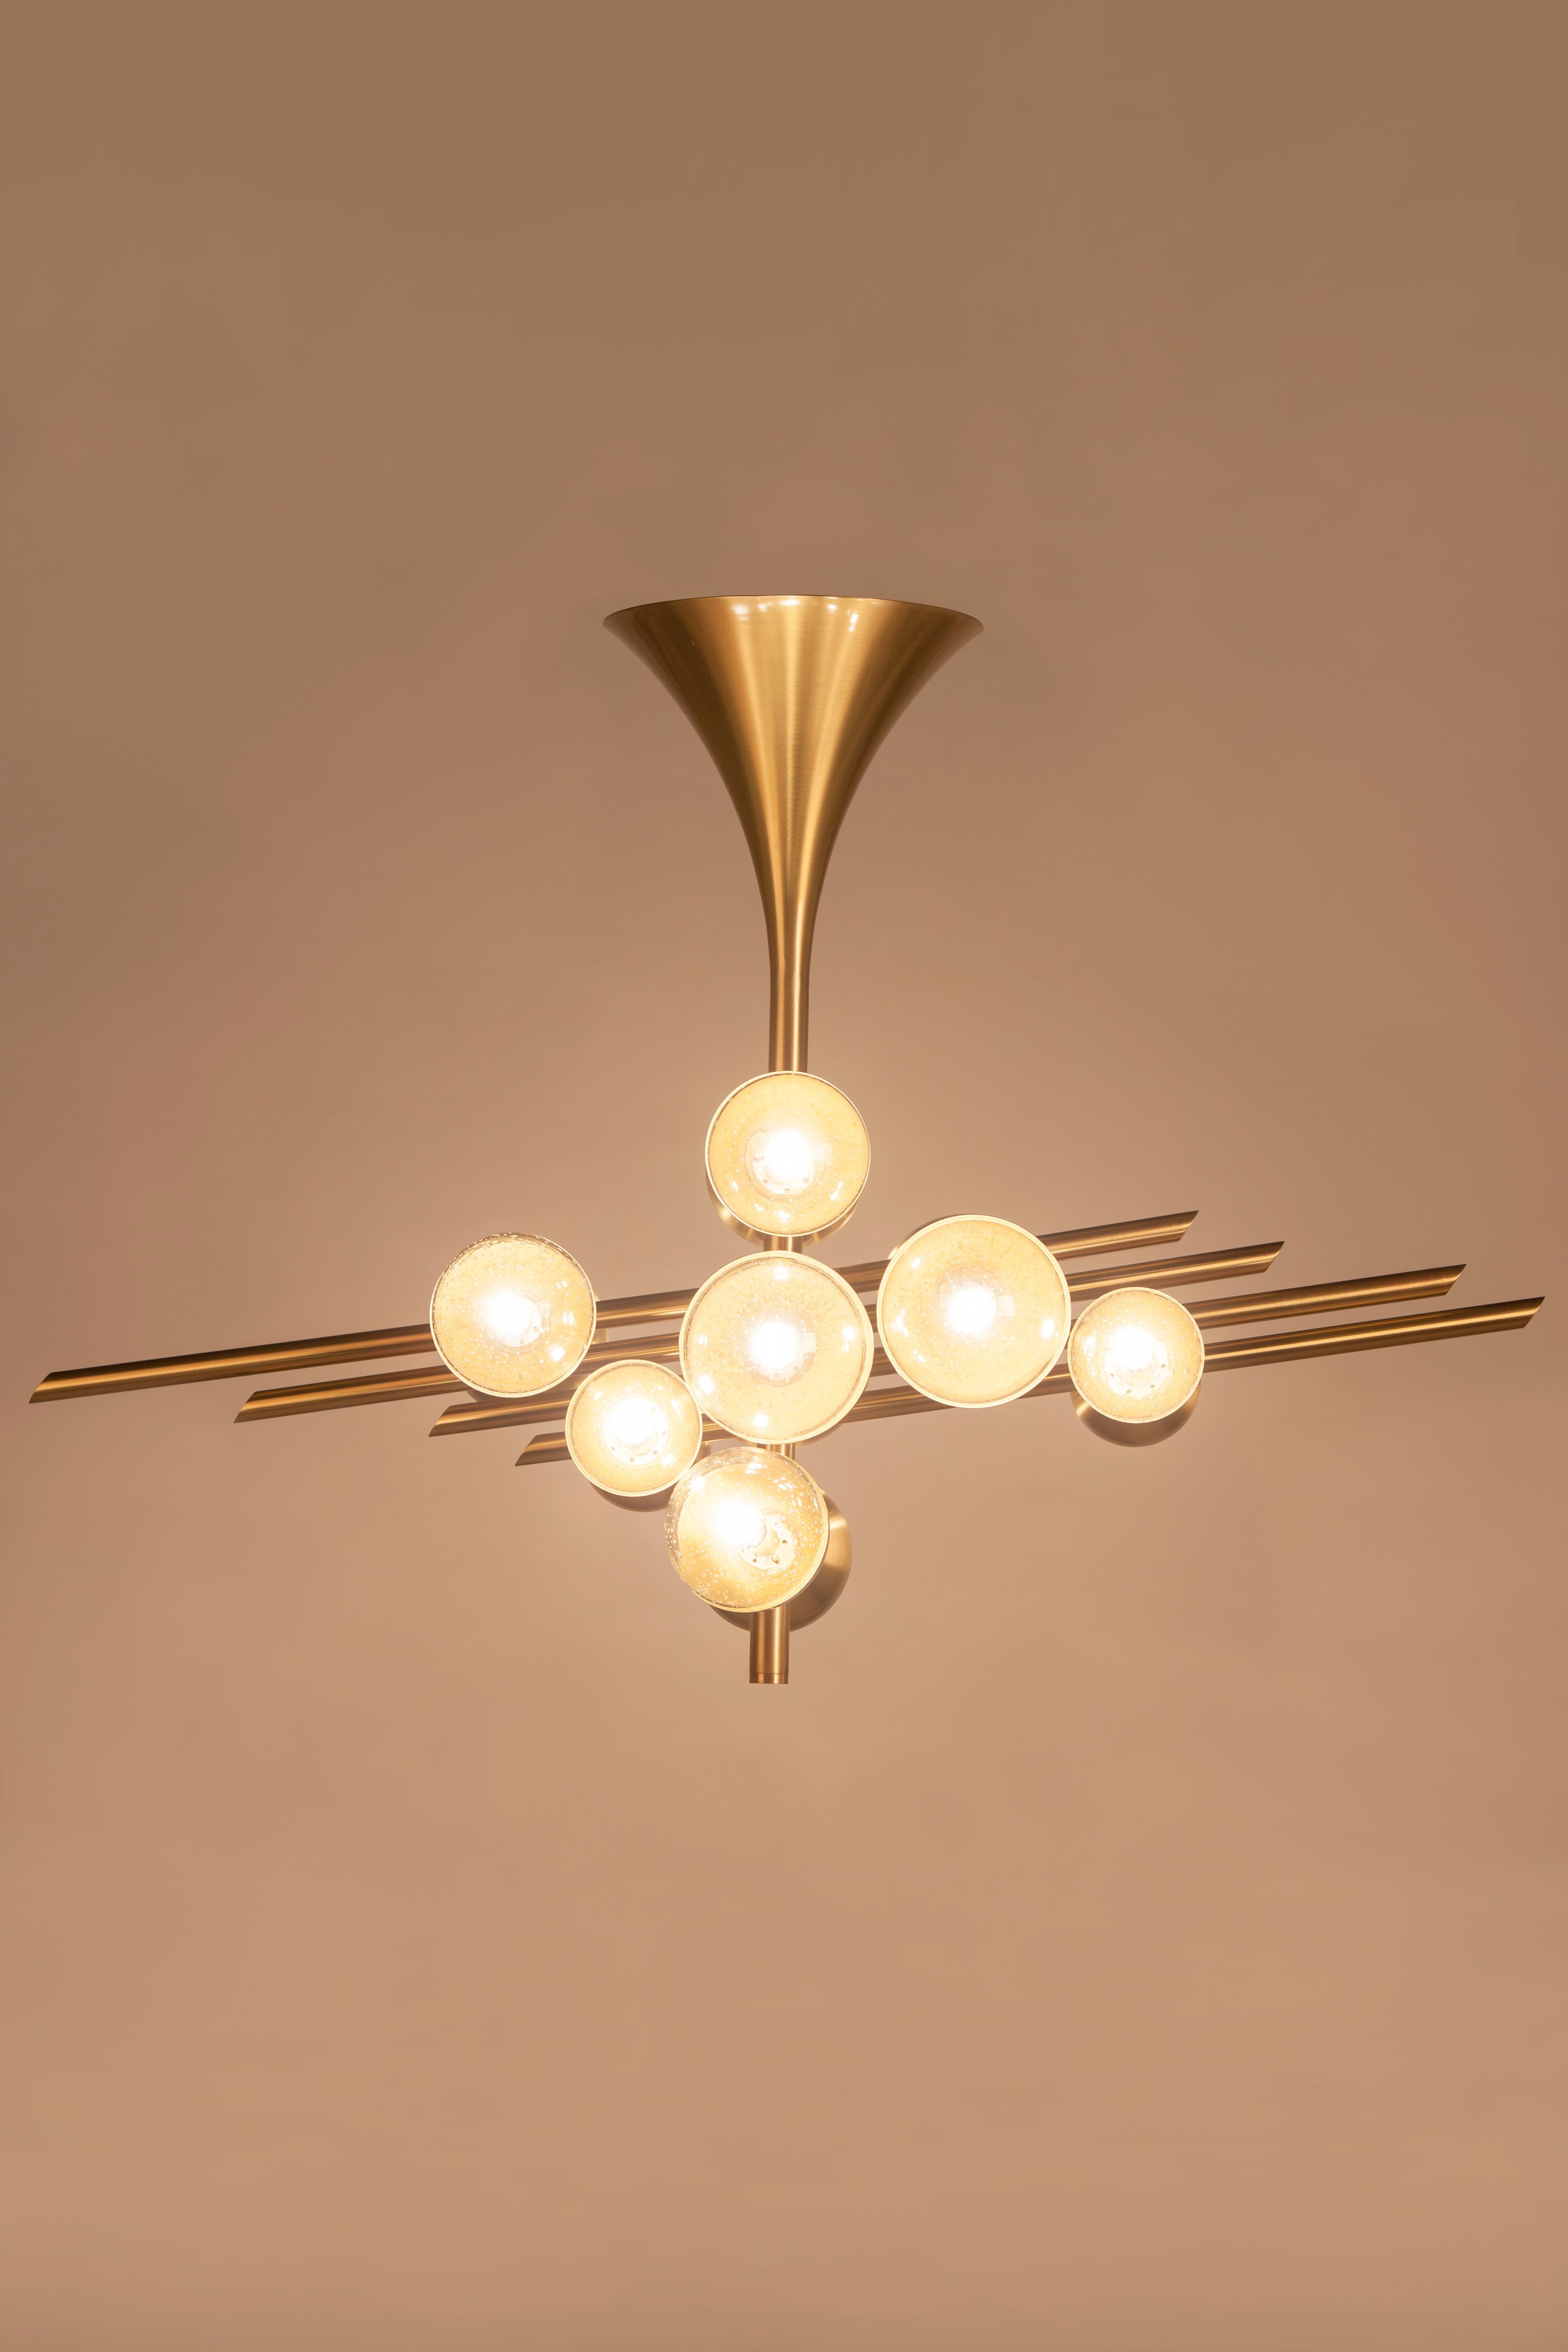 Flute Suspension lamp, Modern Collection, Handcrafted in Portugal - Europe by Greenapple.

The Flute ard deco chandelier is a statement lighting piece that brings harmony to any space, requiring no musical sheet for one to appreciate its design.